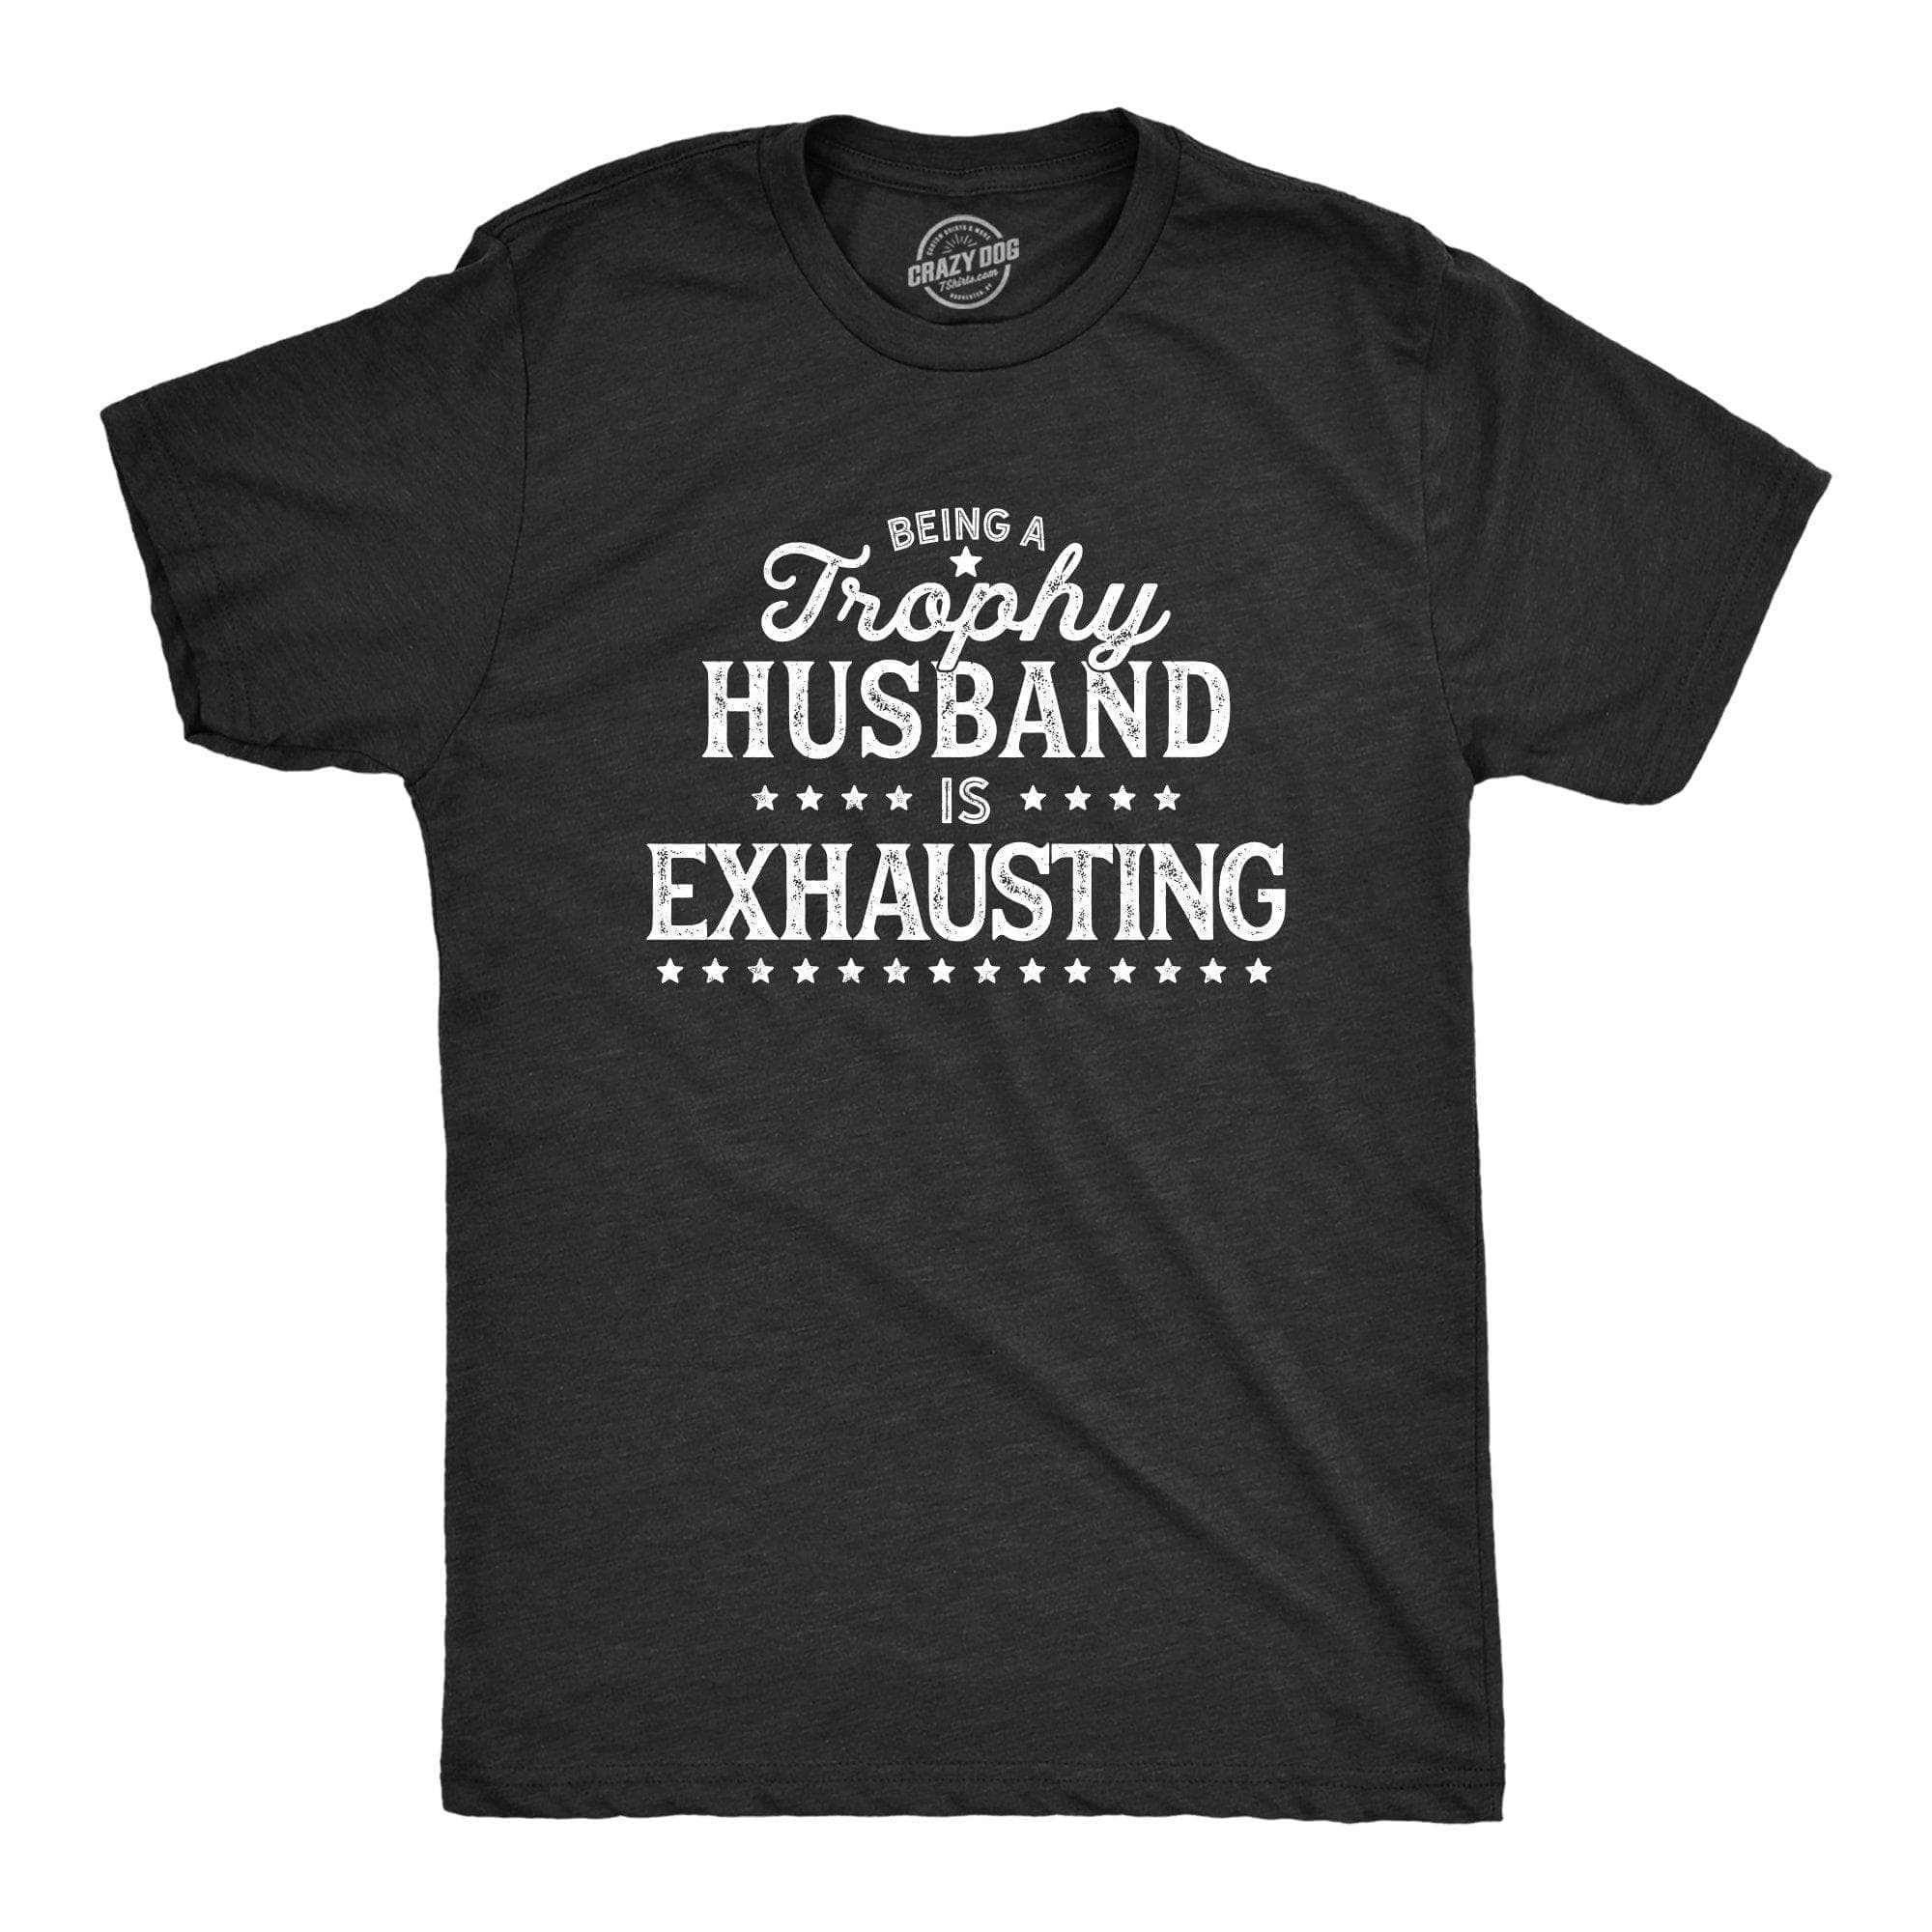 Being A Trophy Husband Is Exhausting Men's Tshirt - Crazy Dog T-Shirts